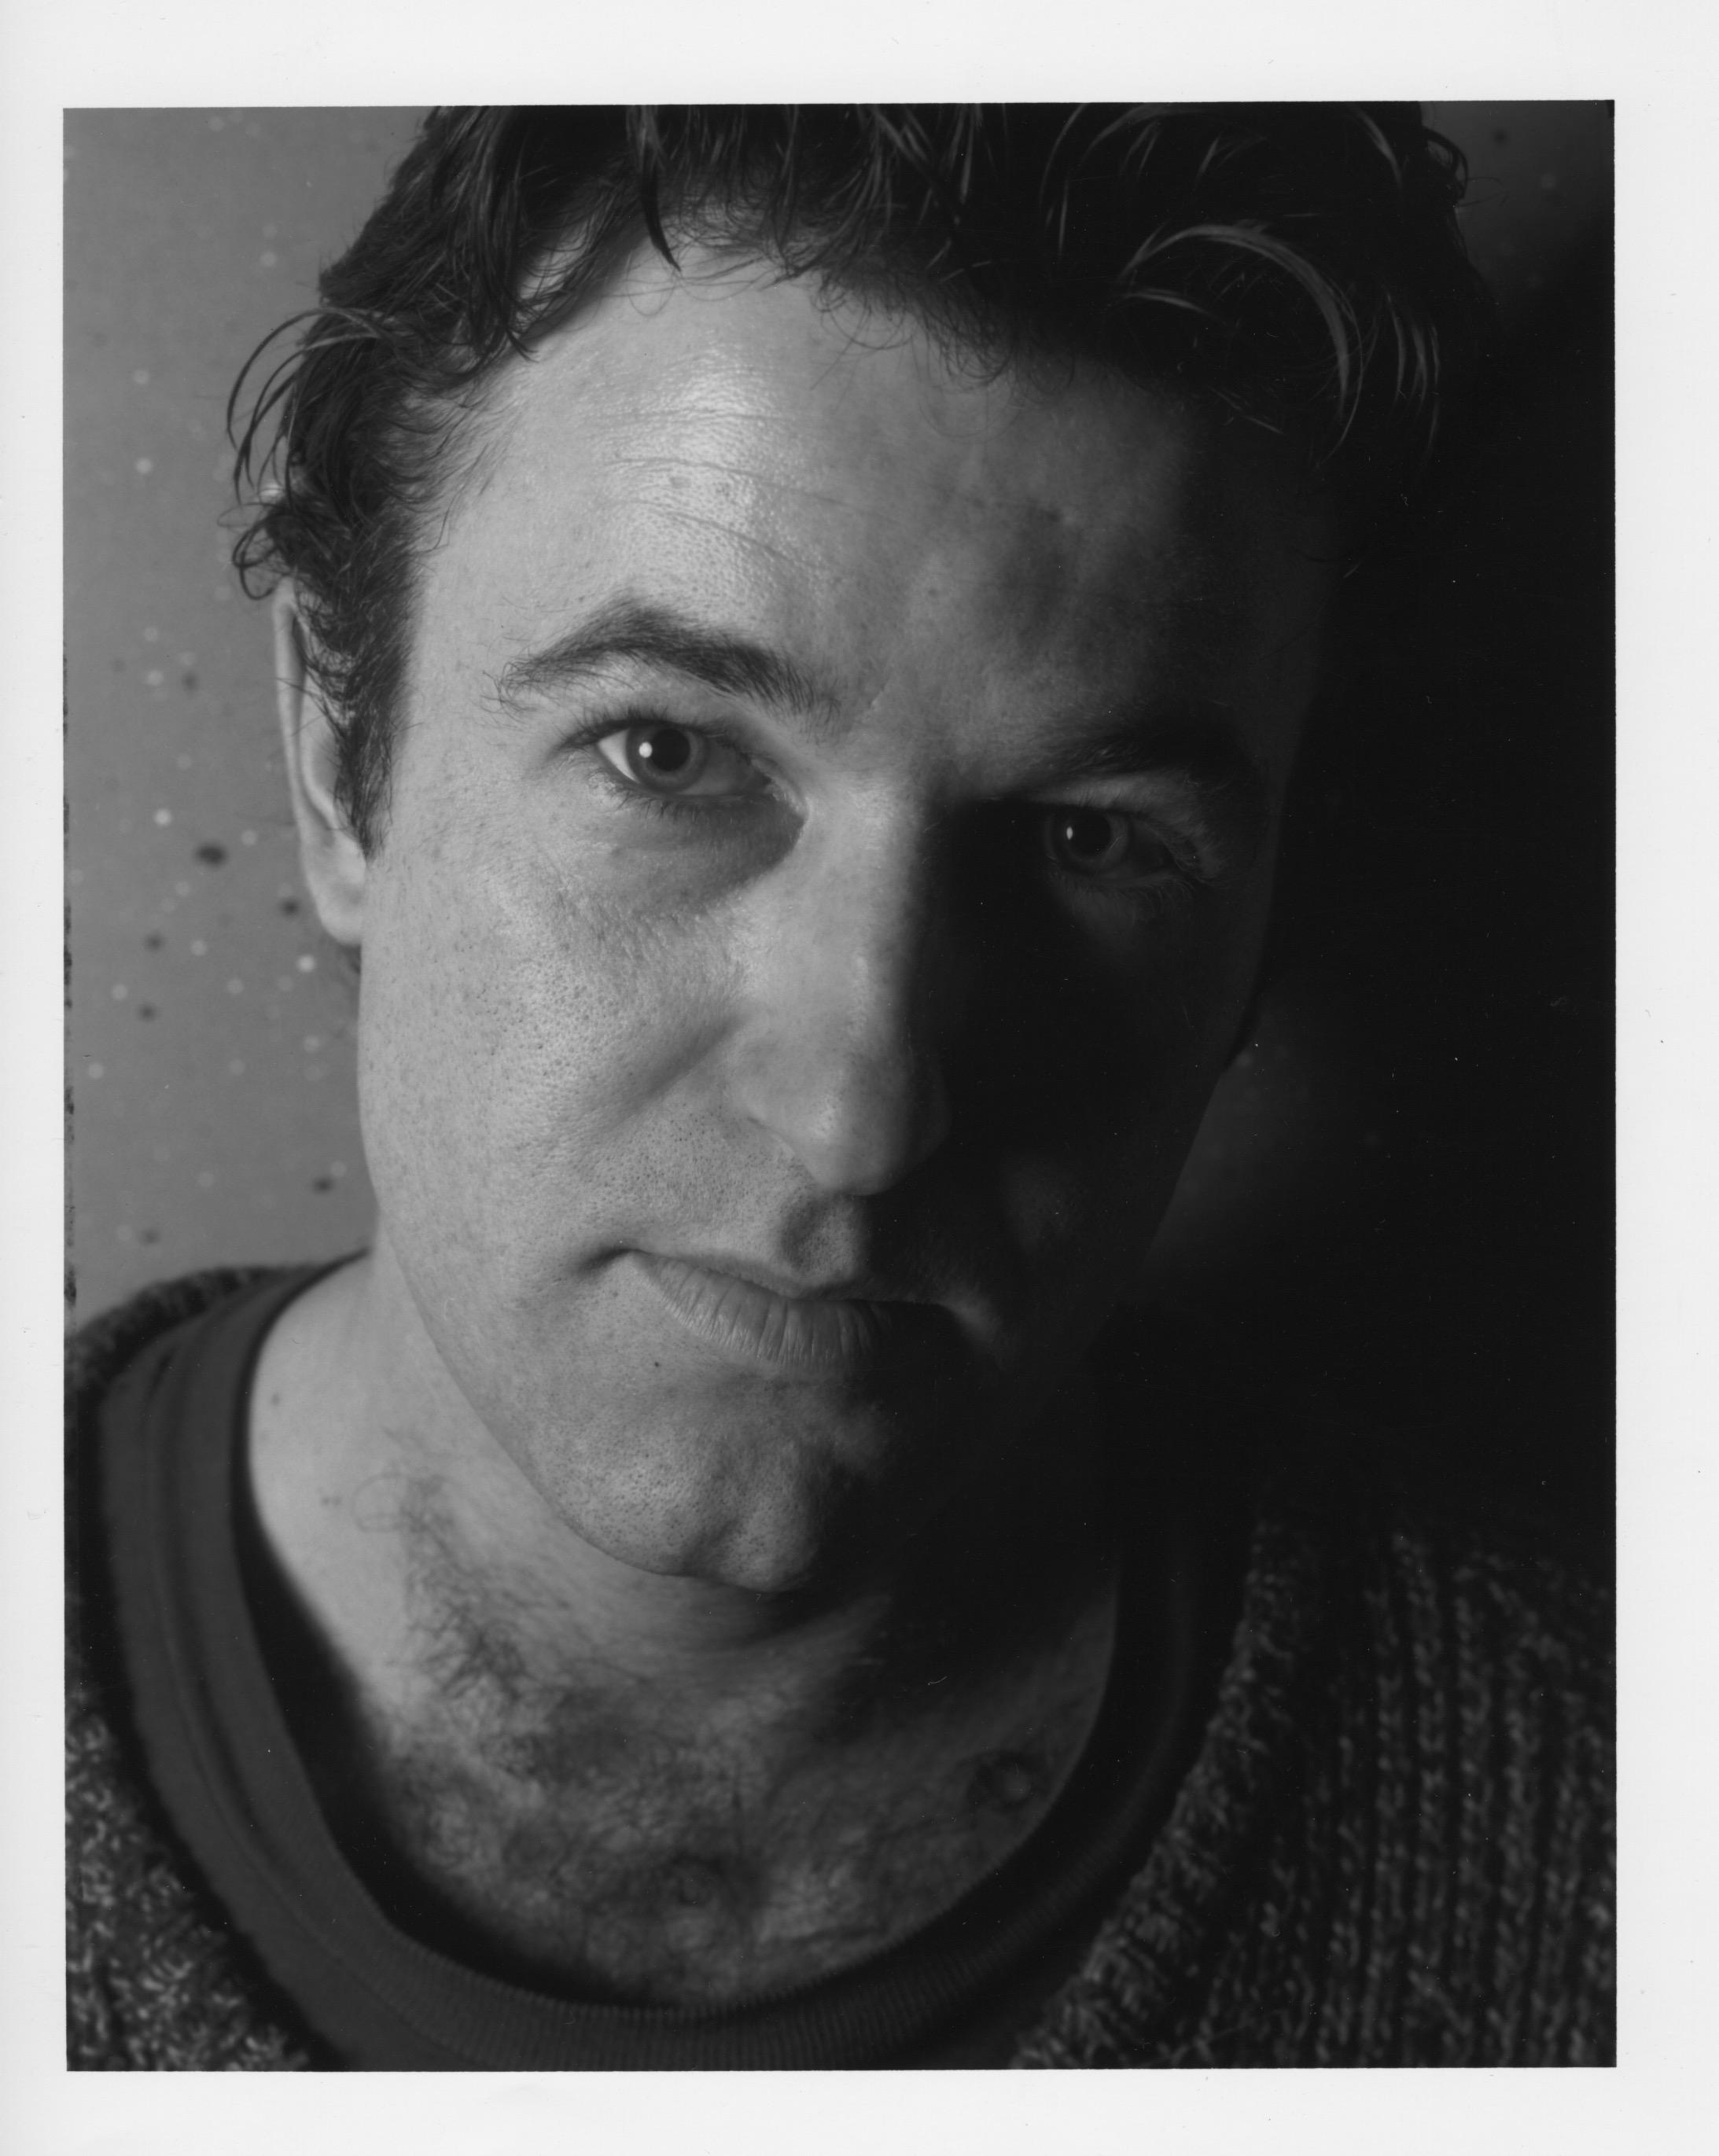 A black and white photo of a white man wearing a sweater looking directly into the camera.